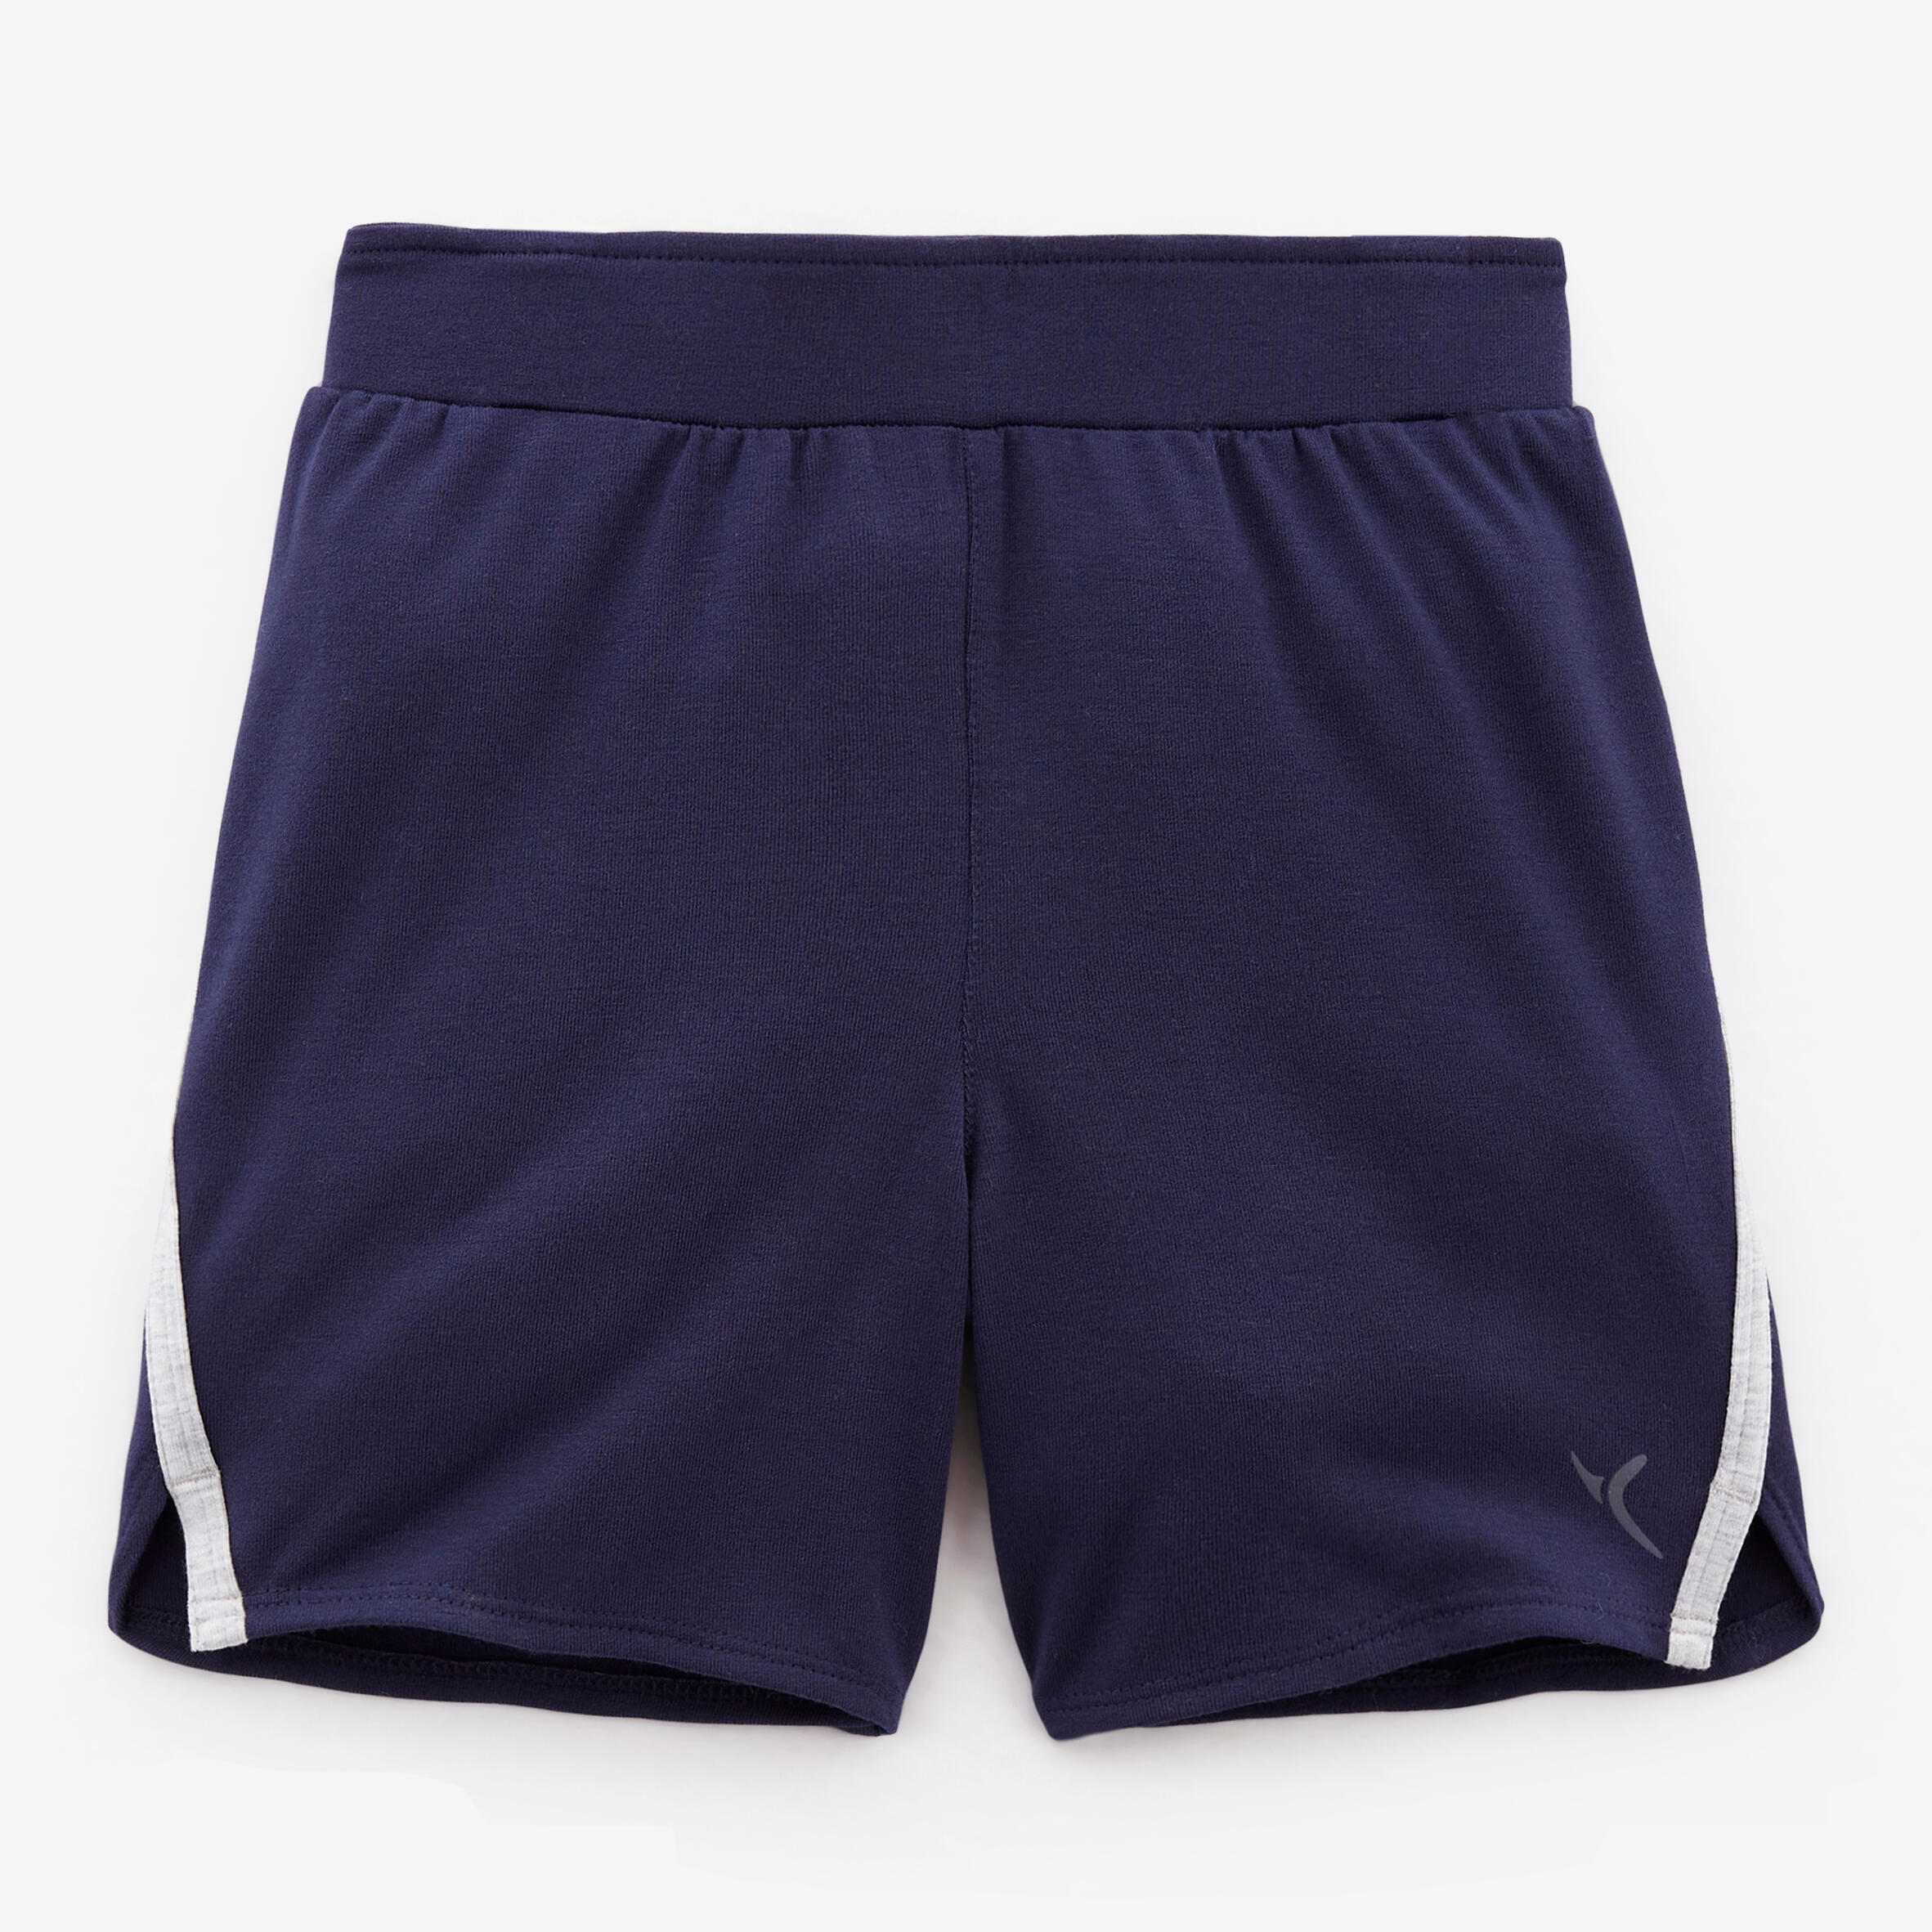 Baby Breathable and Adjustable Shorts 4/4